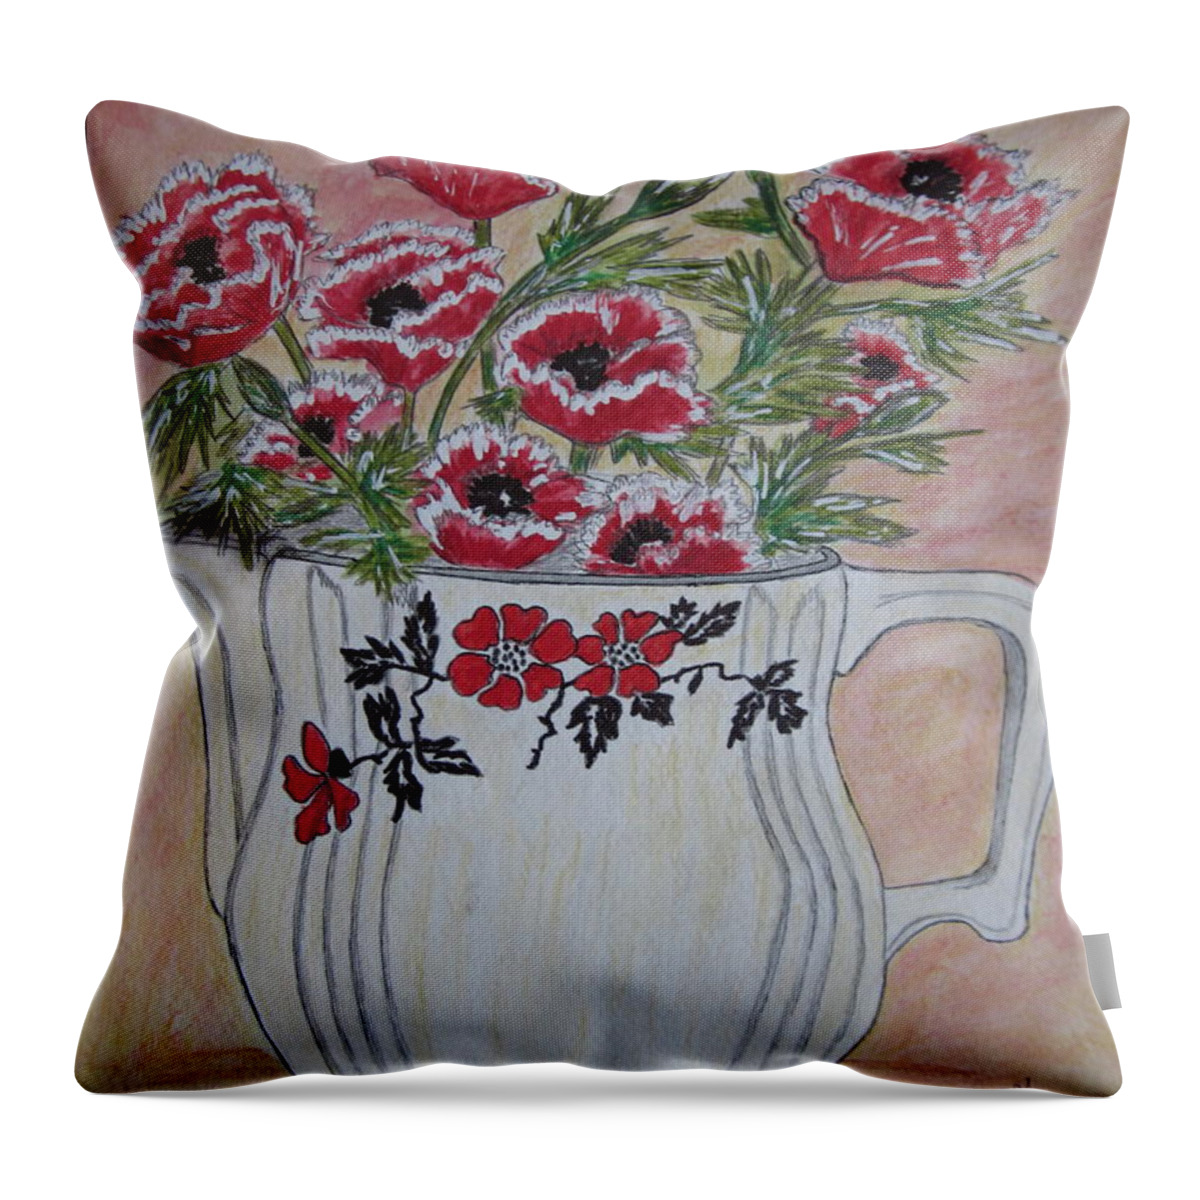 Hall China Throw Pillow featuring the painting Hall China Red Poppy and Poppies by Kathy Marrs Chandler